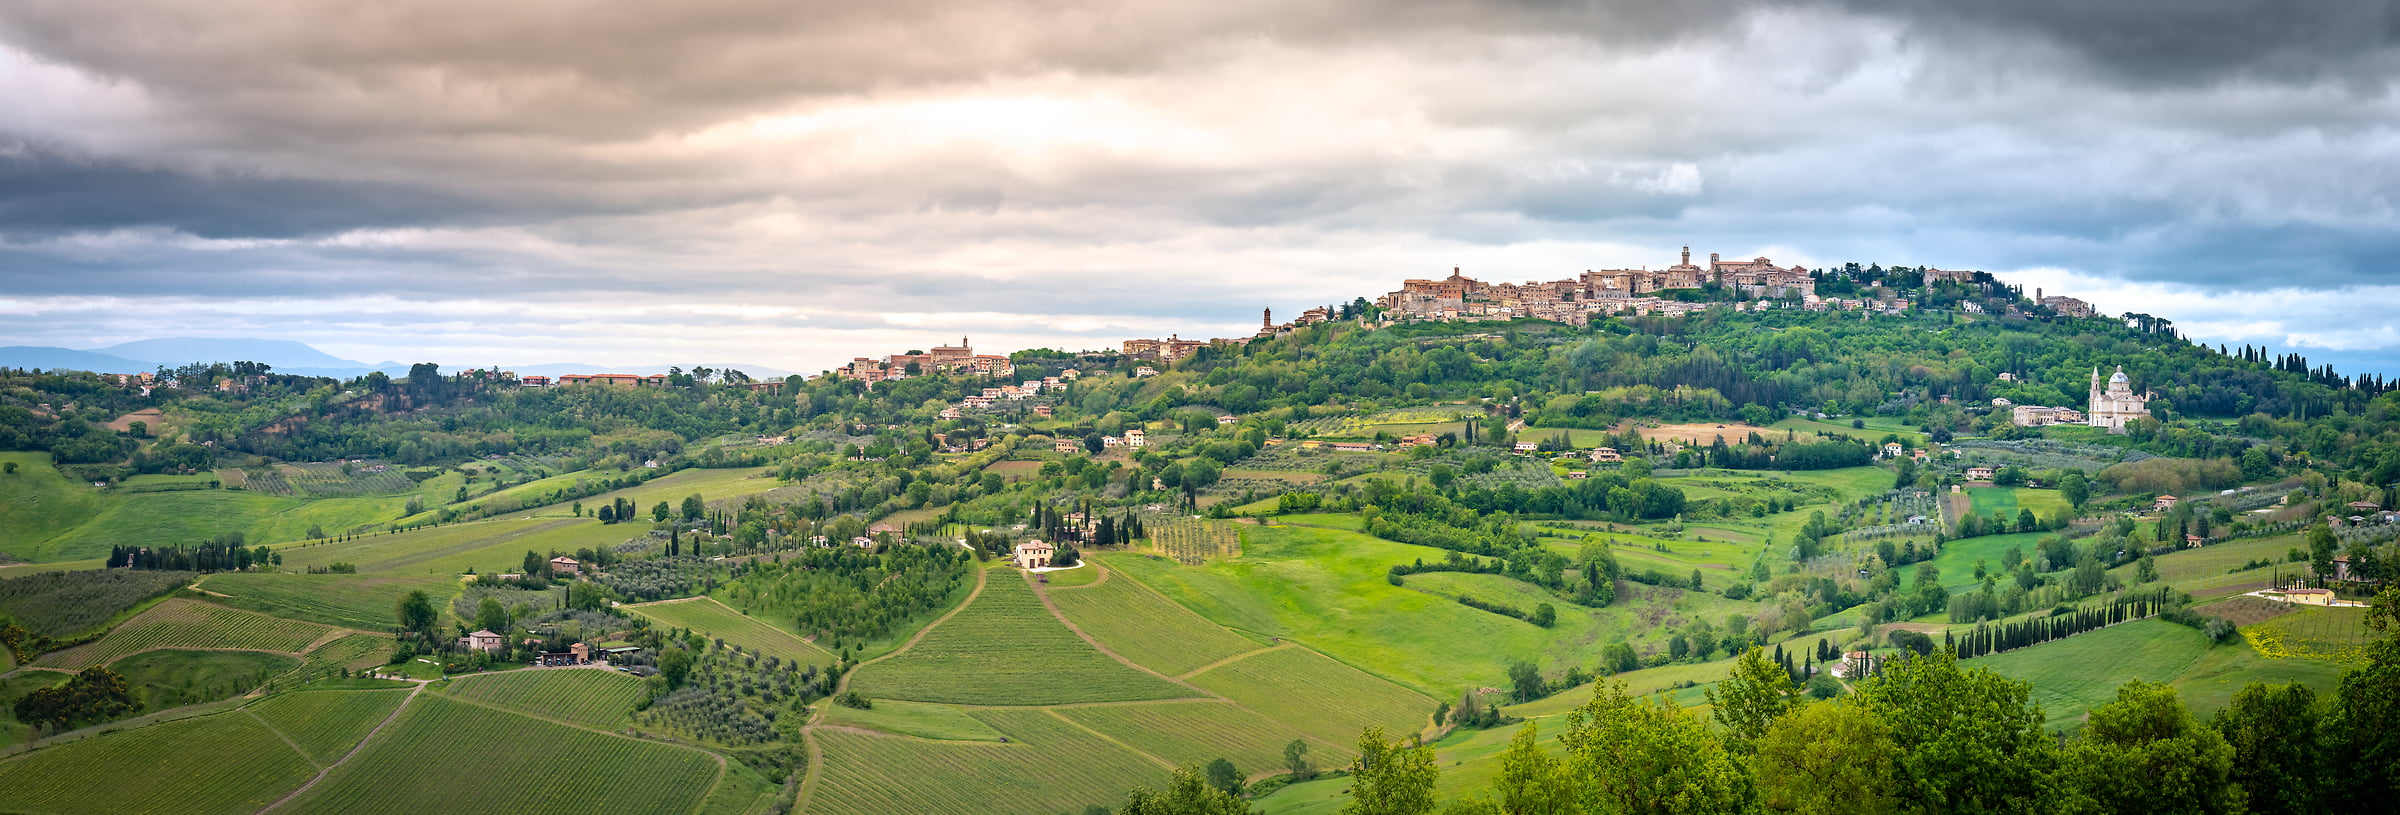 283 megapixels! A very high resolution, large-format VAST photo print of an Italian landscape; photograph created by Justin Katz in Montepulciano, Tuscany, Italy